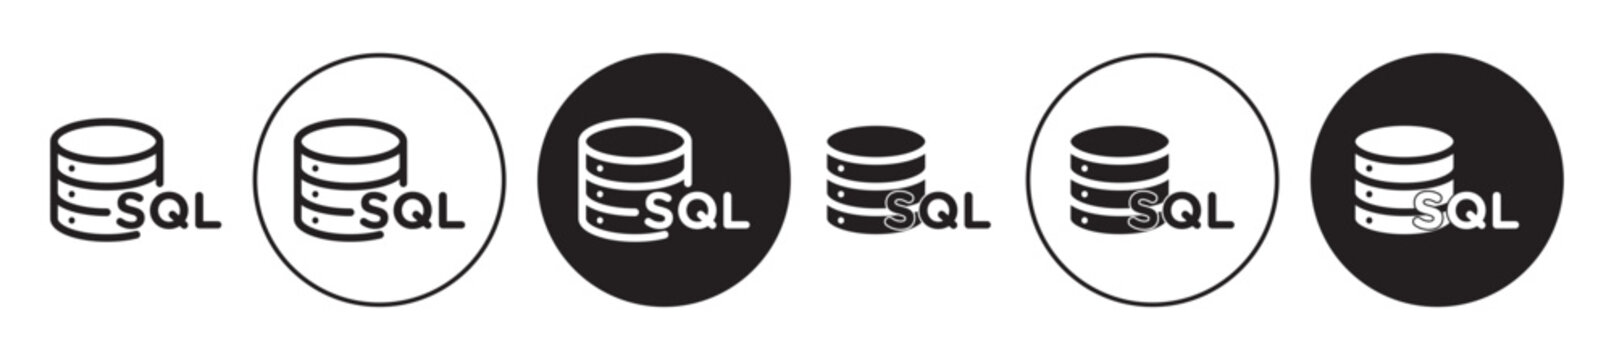 sql (Structured Query Language) icon set. database server vector symbol in black color. mysql query sign for apps and website ui designs.